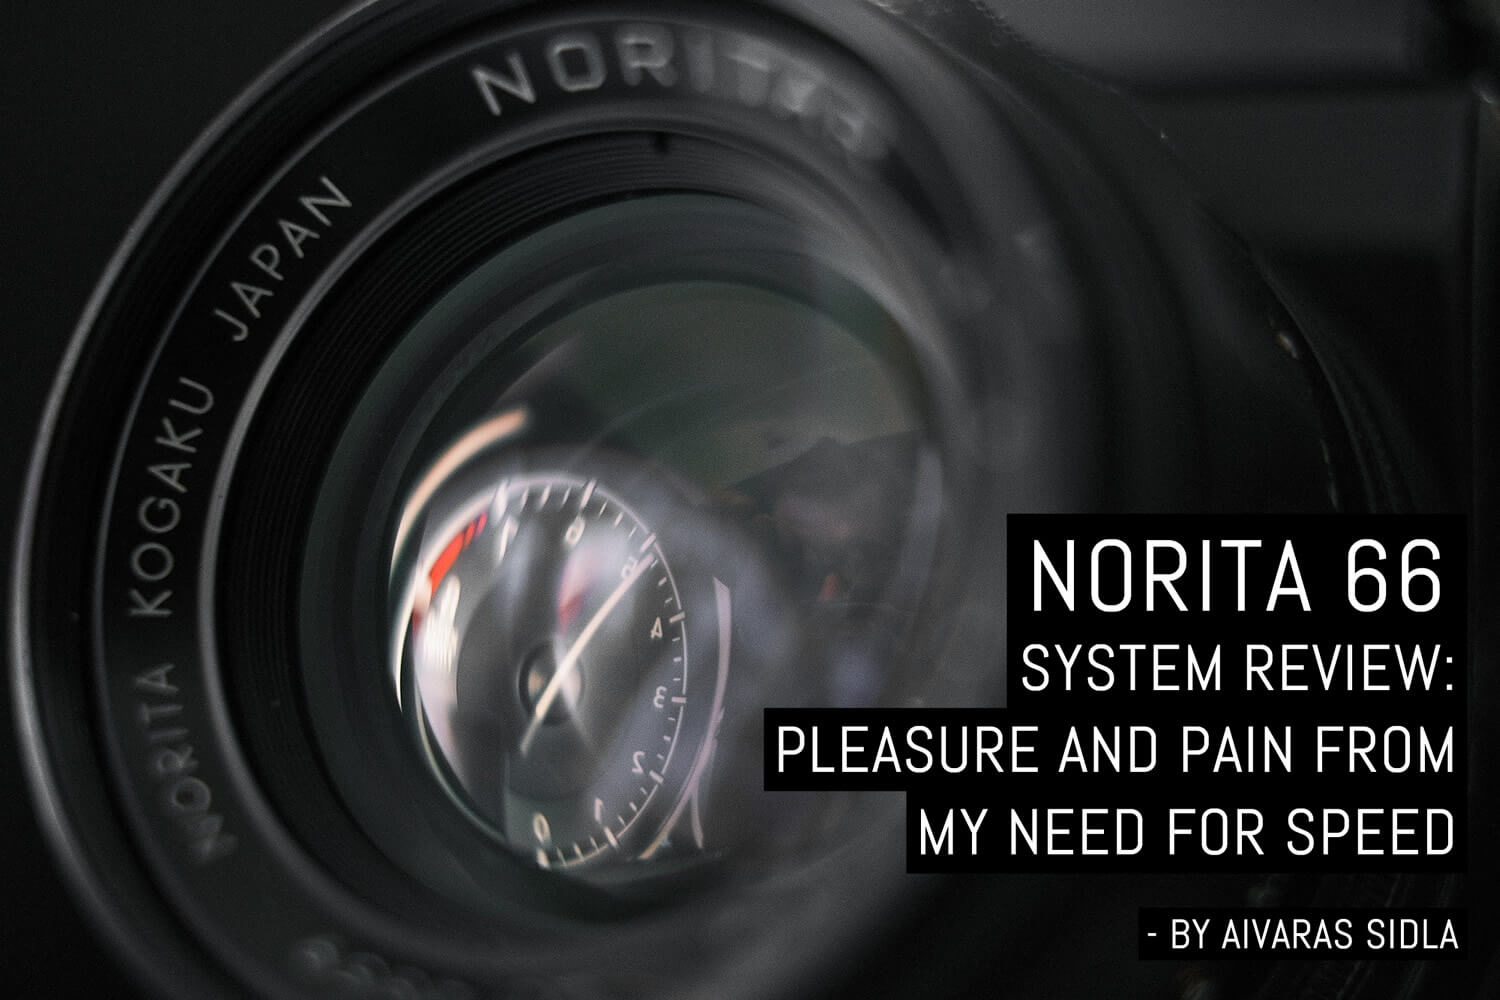 Norita 66 system review: Pleasure and pain from my need for speed